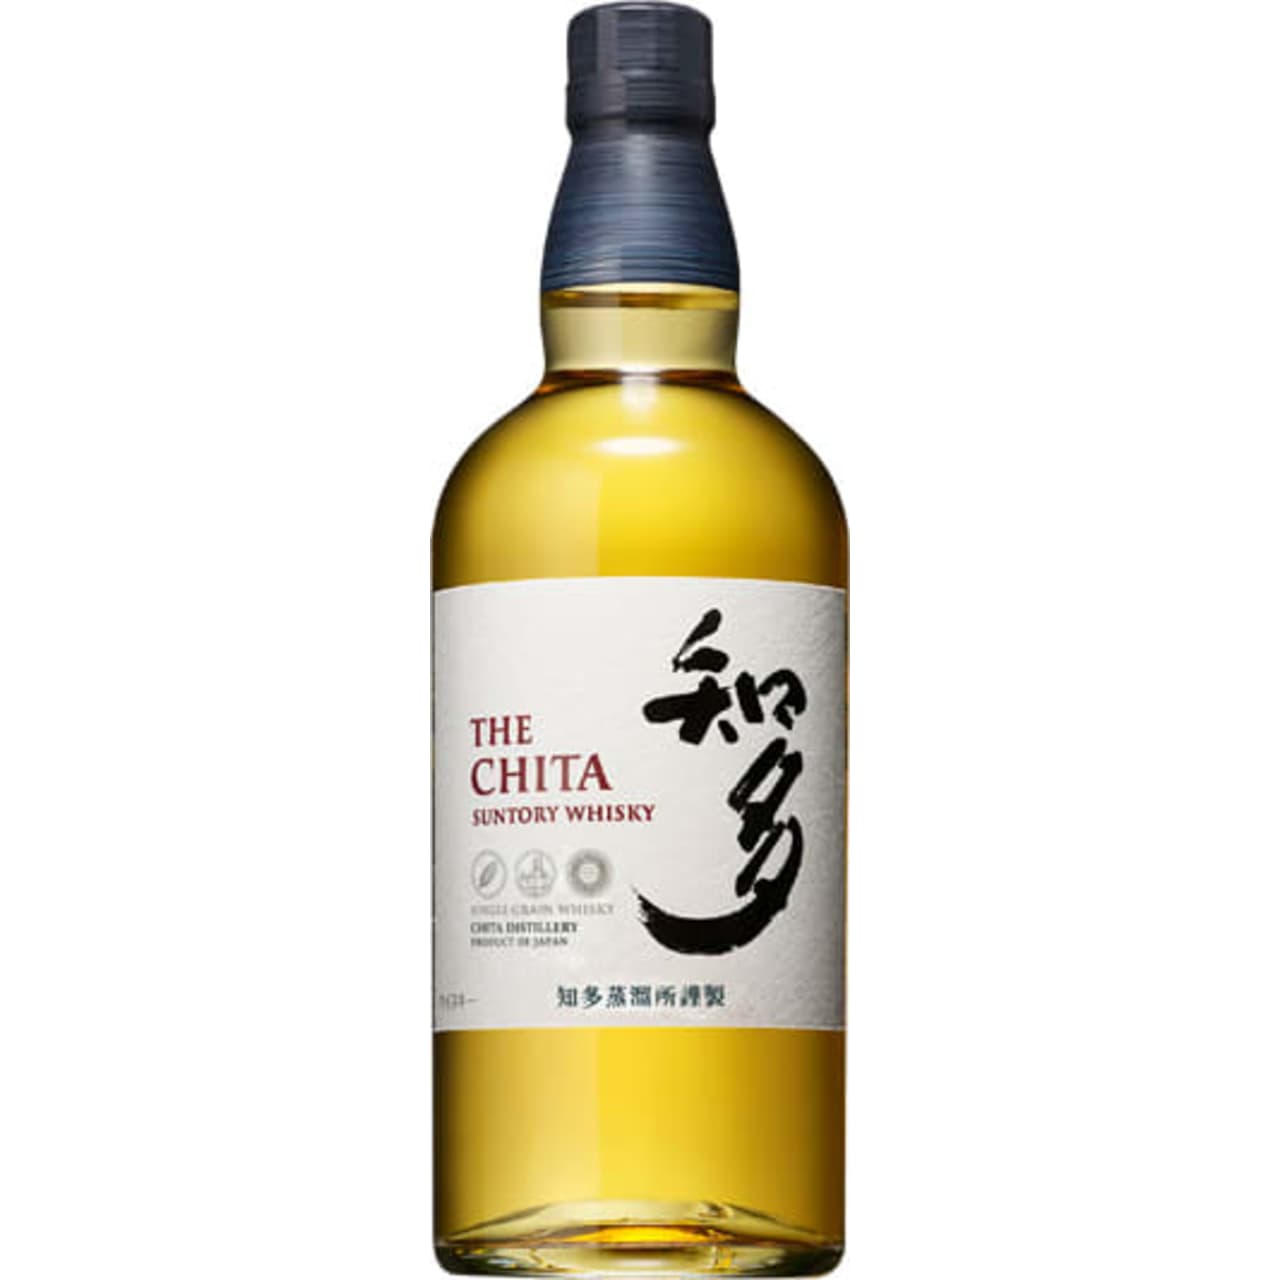 The Chita Suntory, is bright gold in colour, with a nose of crème brulee, cardamom, acacia honey and blossoming rose.